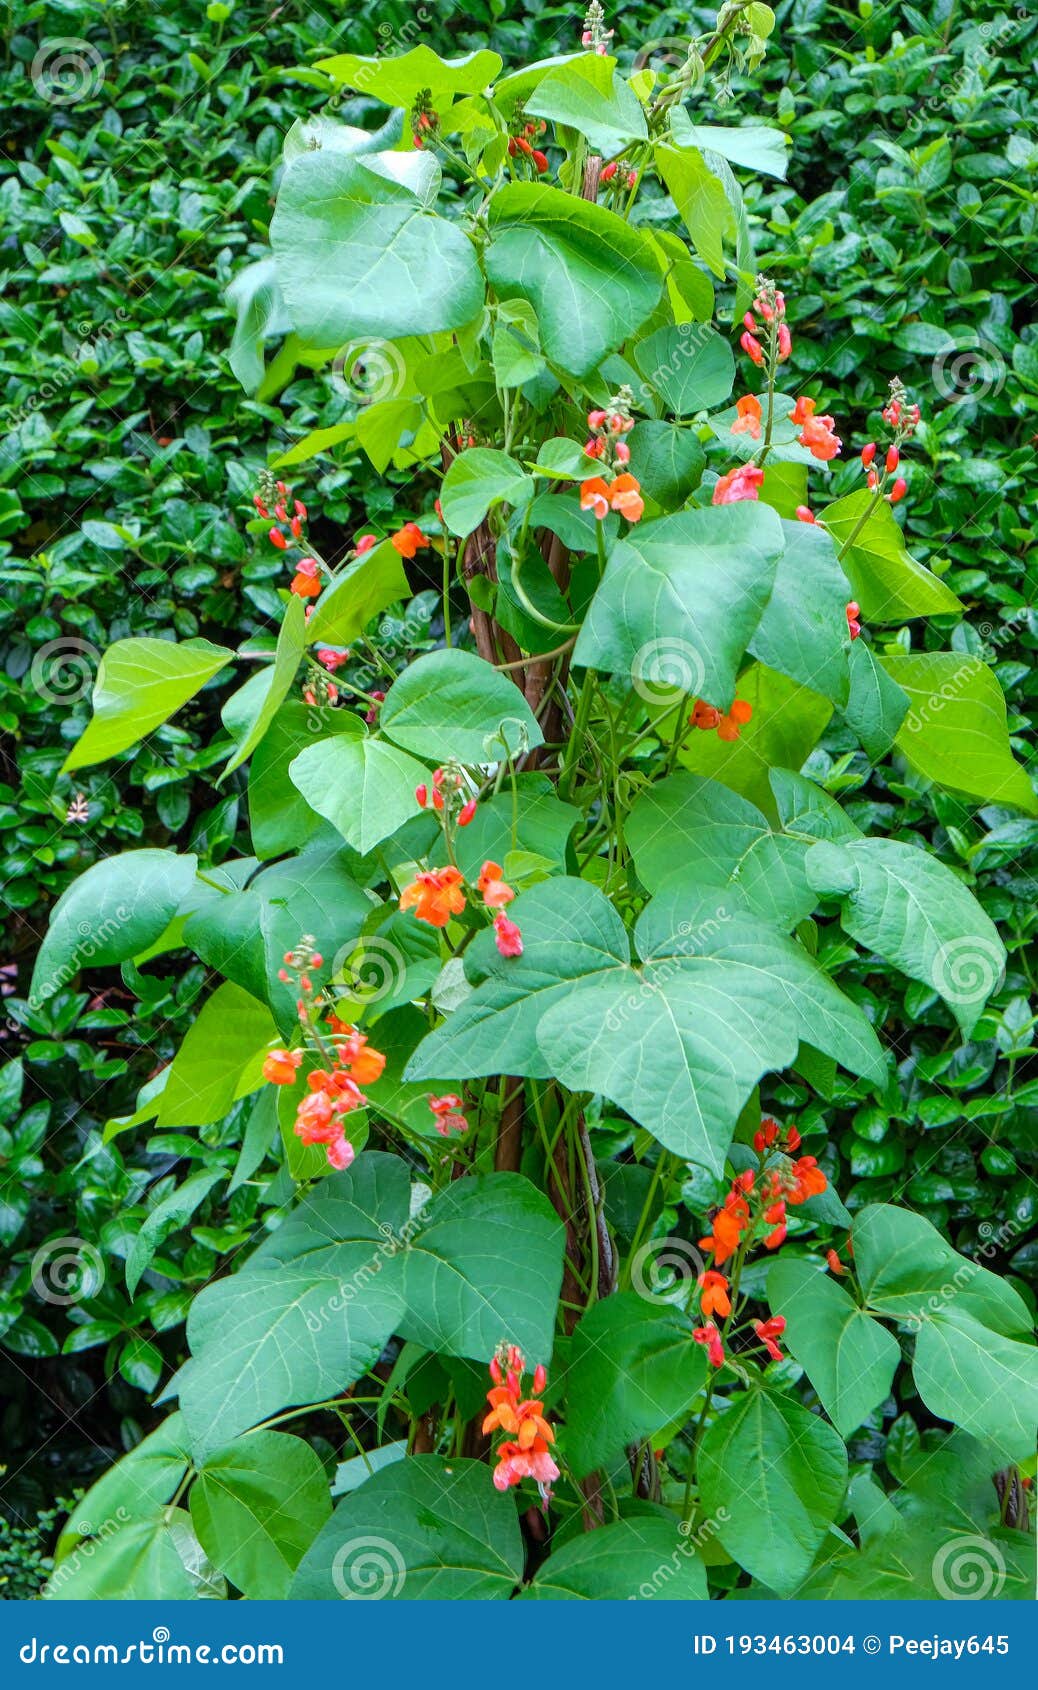 beautiful red flowers of runner beans stock photo - image of